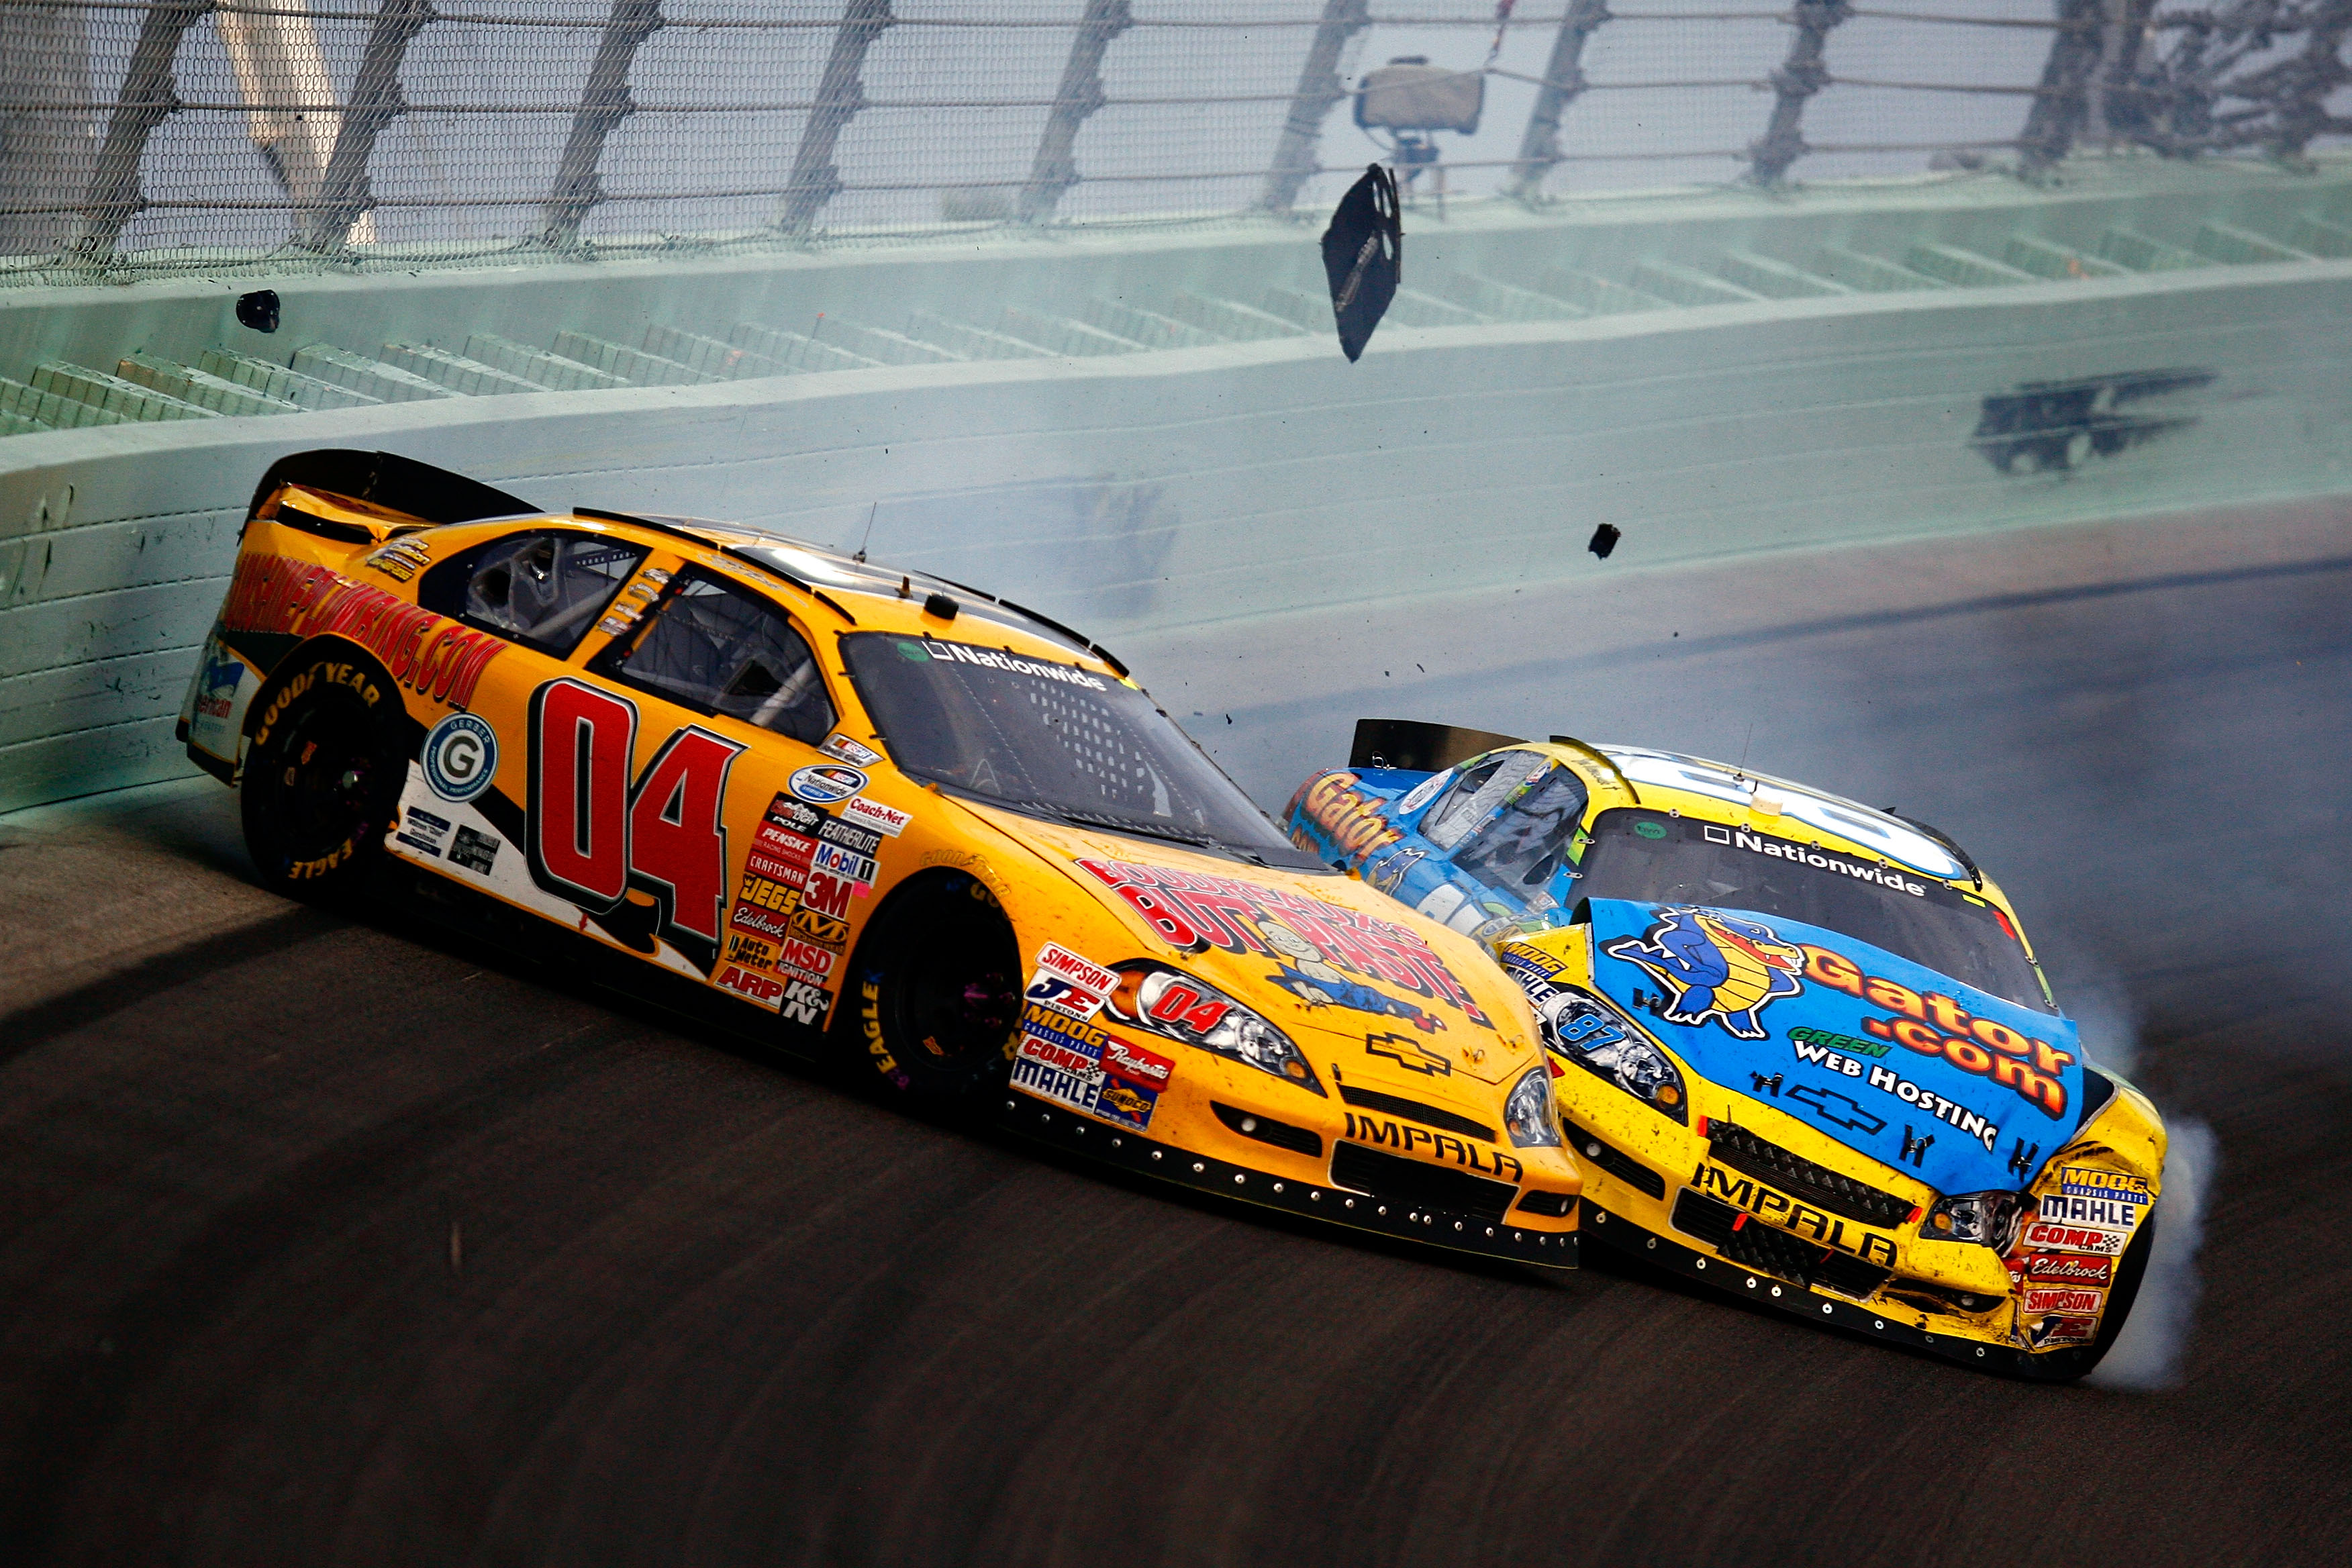 HOMESTEAD, FL - NOVEMBER 20:  Jeremy Clements, driver of the #04 Boudreaux's Butt Paste Chevrolet, and Joe Nemechek, driver of the #87 HostGator.com Chevrolet,  crash after an incident in the NASCAR Nationwide Series Ford 300 at Homestead-Miami Speedway o